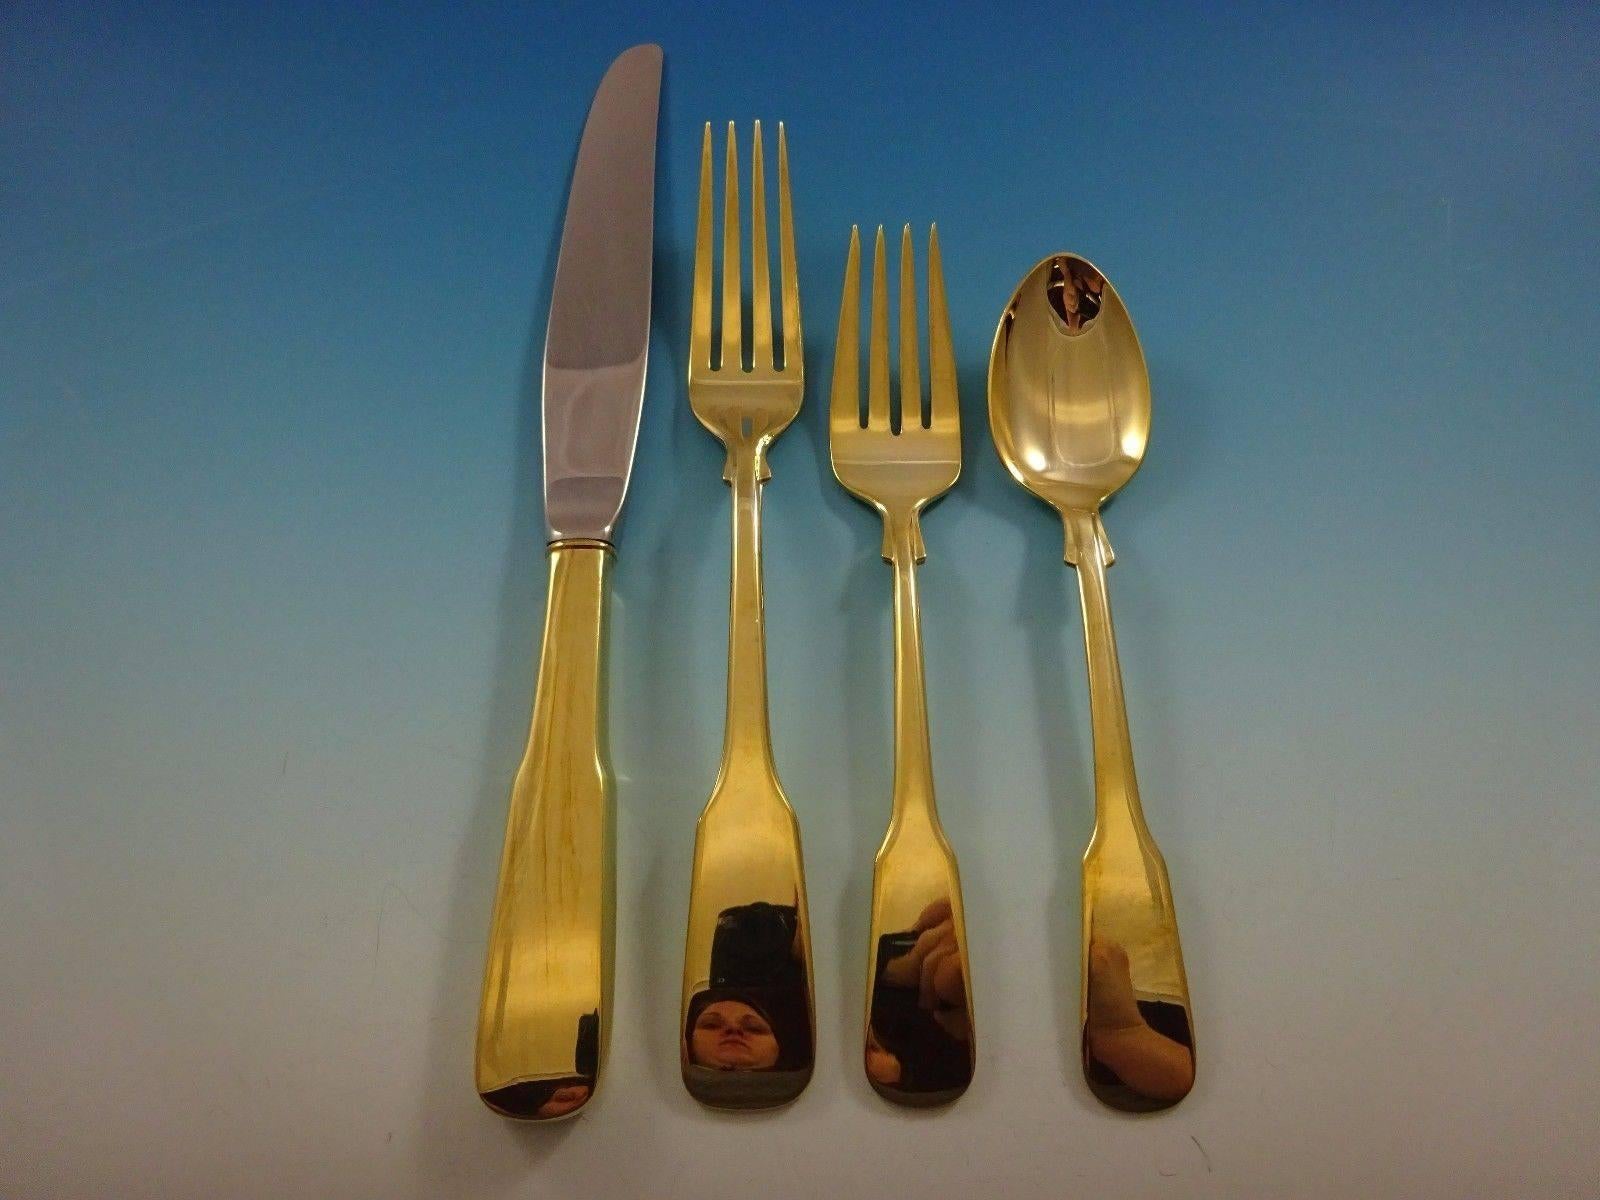 Eighteen ten gold by International sterling silver flatware set - 32 pieces. Gold flatware is on trend and makes a bold statement on your table. This set is vermeil (completely gold-washed) and includes: 

eight knives, 8 7/8